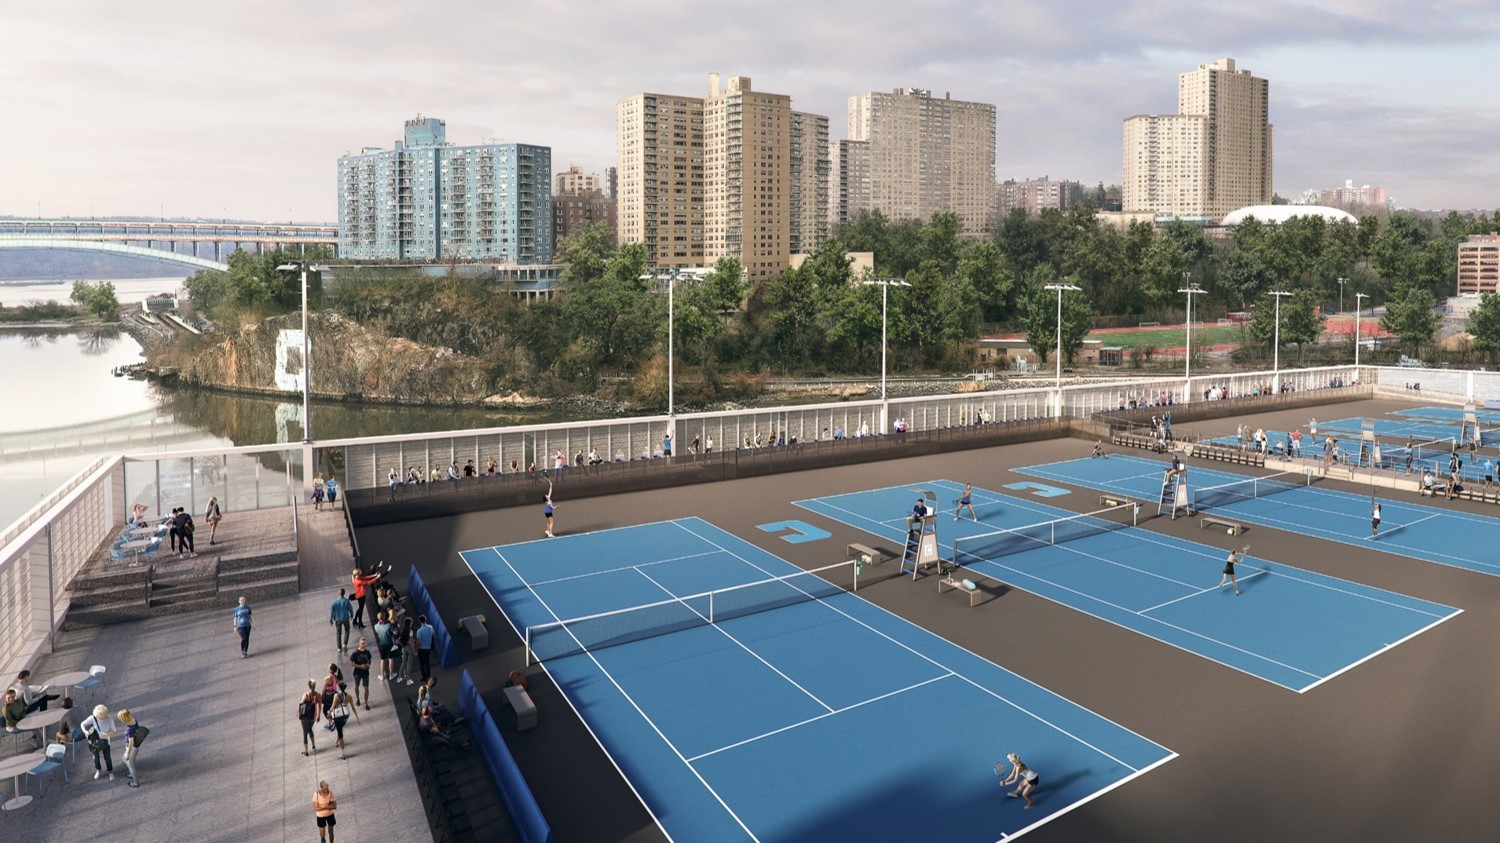  A rendering of the rooftop tennis courts, looking northeast.